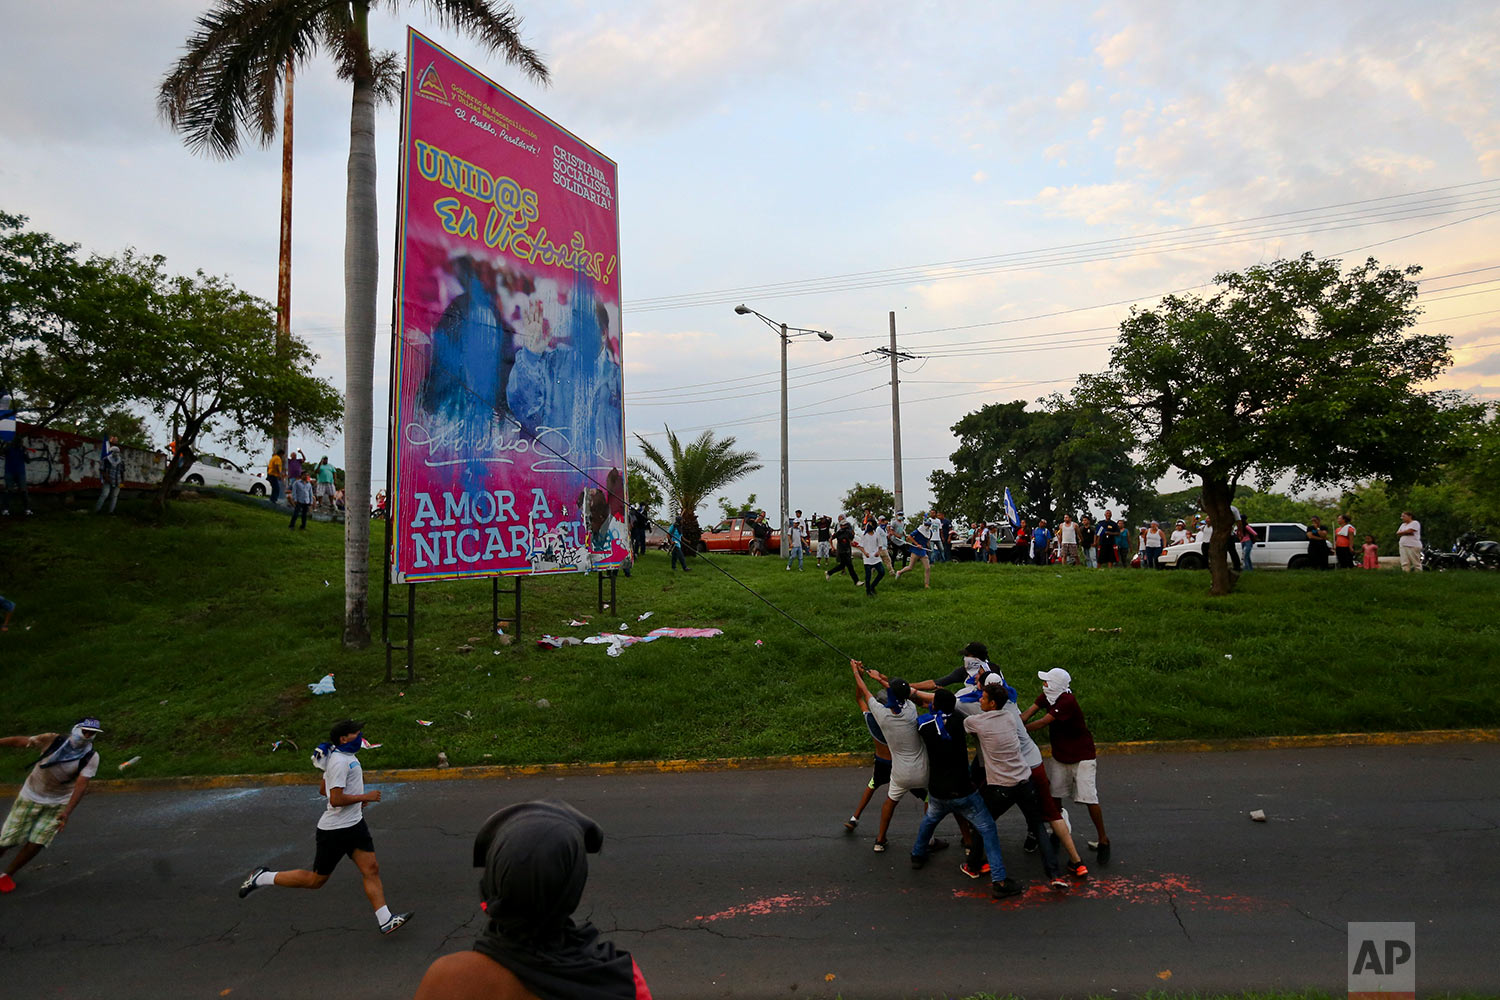  In this May 20, 2018 photo, anti-government protesters work to pull down a government billboard announcing the Spanish message "United in victory! Love for Nicaragua," in Managua, Nicaragua. (AP Photo/Esteban Felix) 